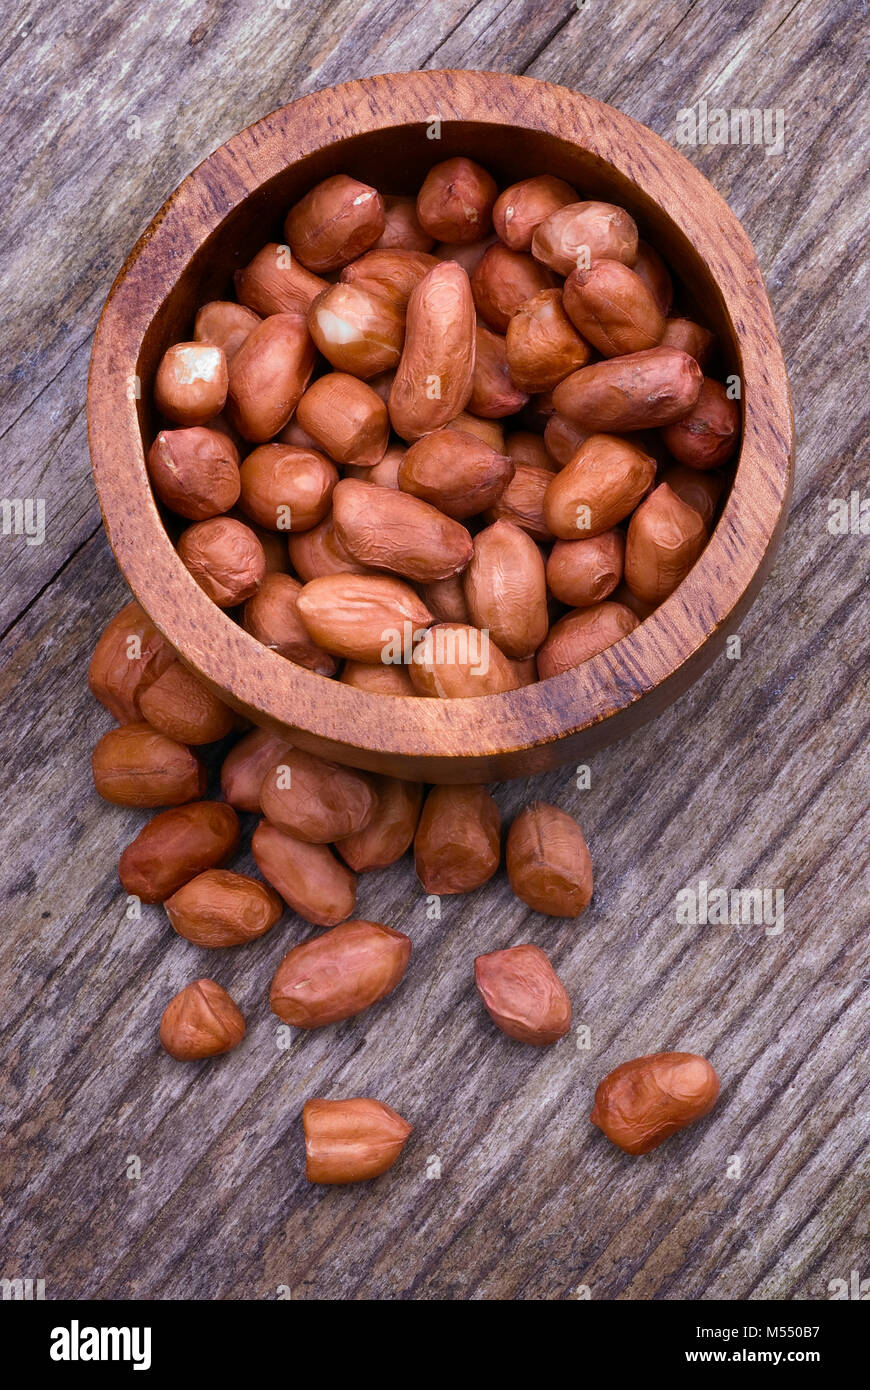 Shelled peanuts (Arachis hypogaea), legumes used for human consumption and animal feed. Stock Photo